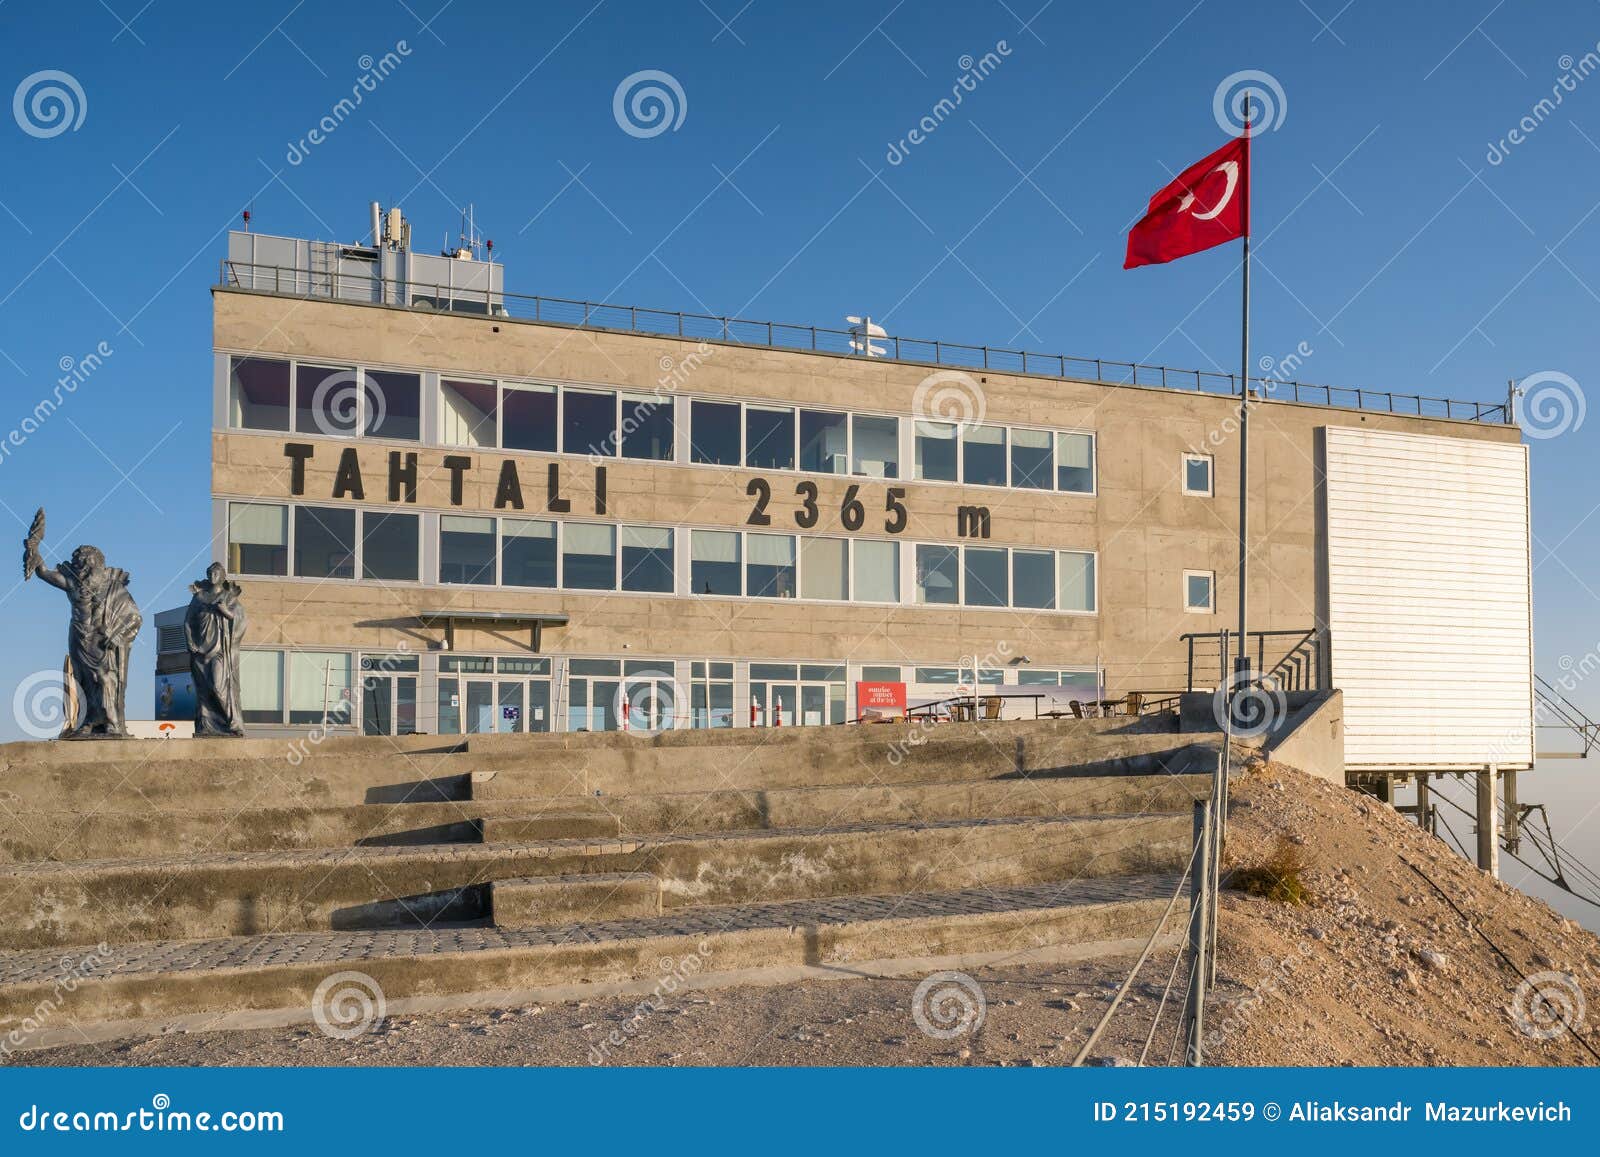 Cable Car Station the Top of Tahtali Mountain in Turkey Editorial Stock Image - Image of city, olympus: 215192459